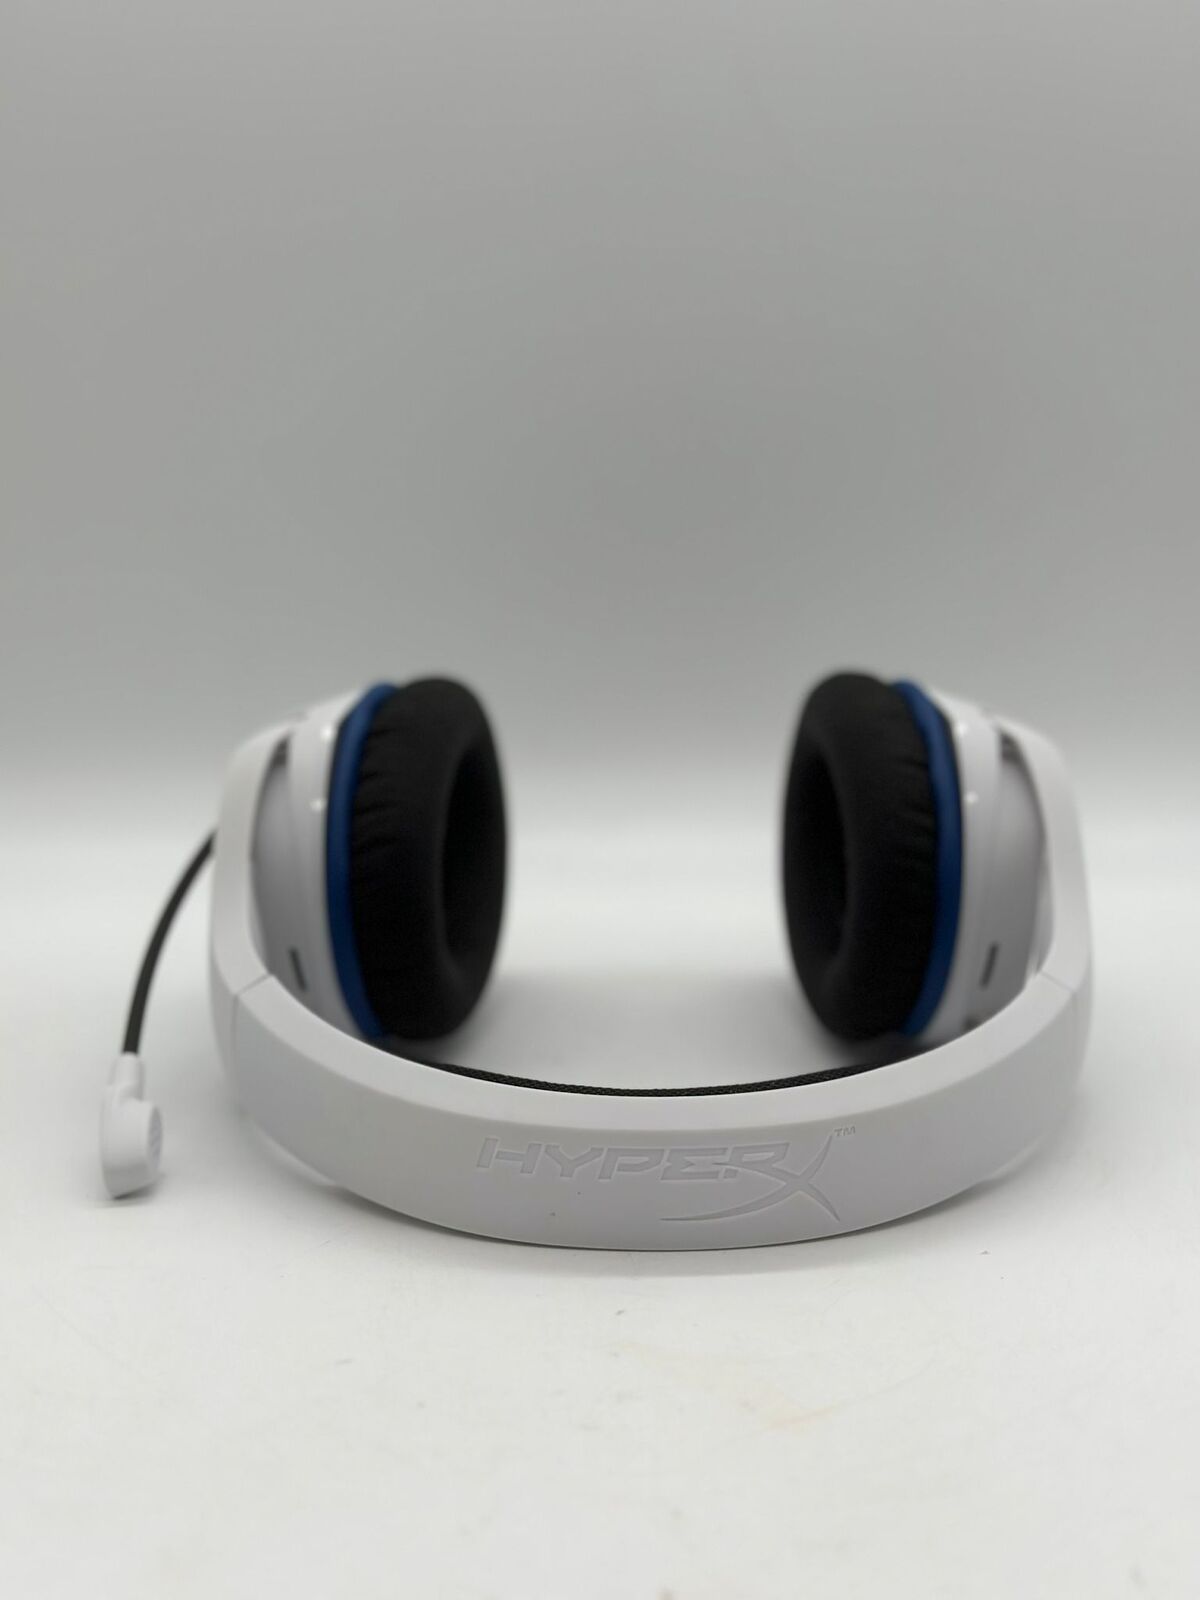 Core (Pre-Owned) White Headset Gaming Cloud Stinger HyperX Wireless